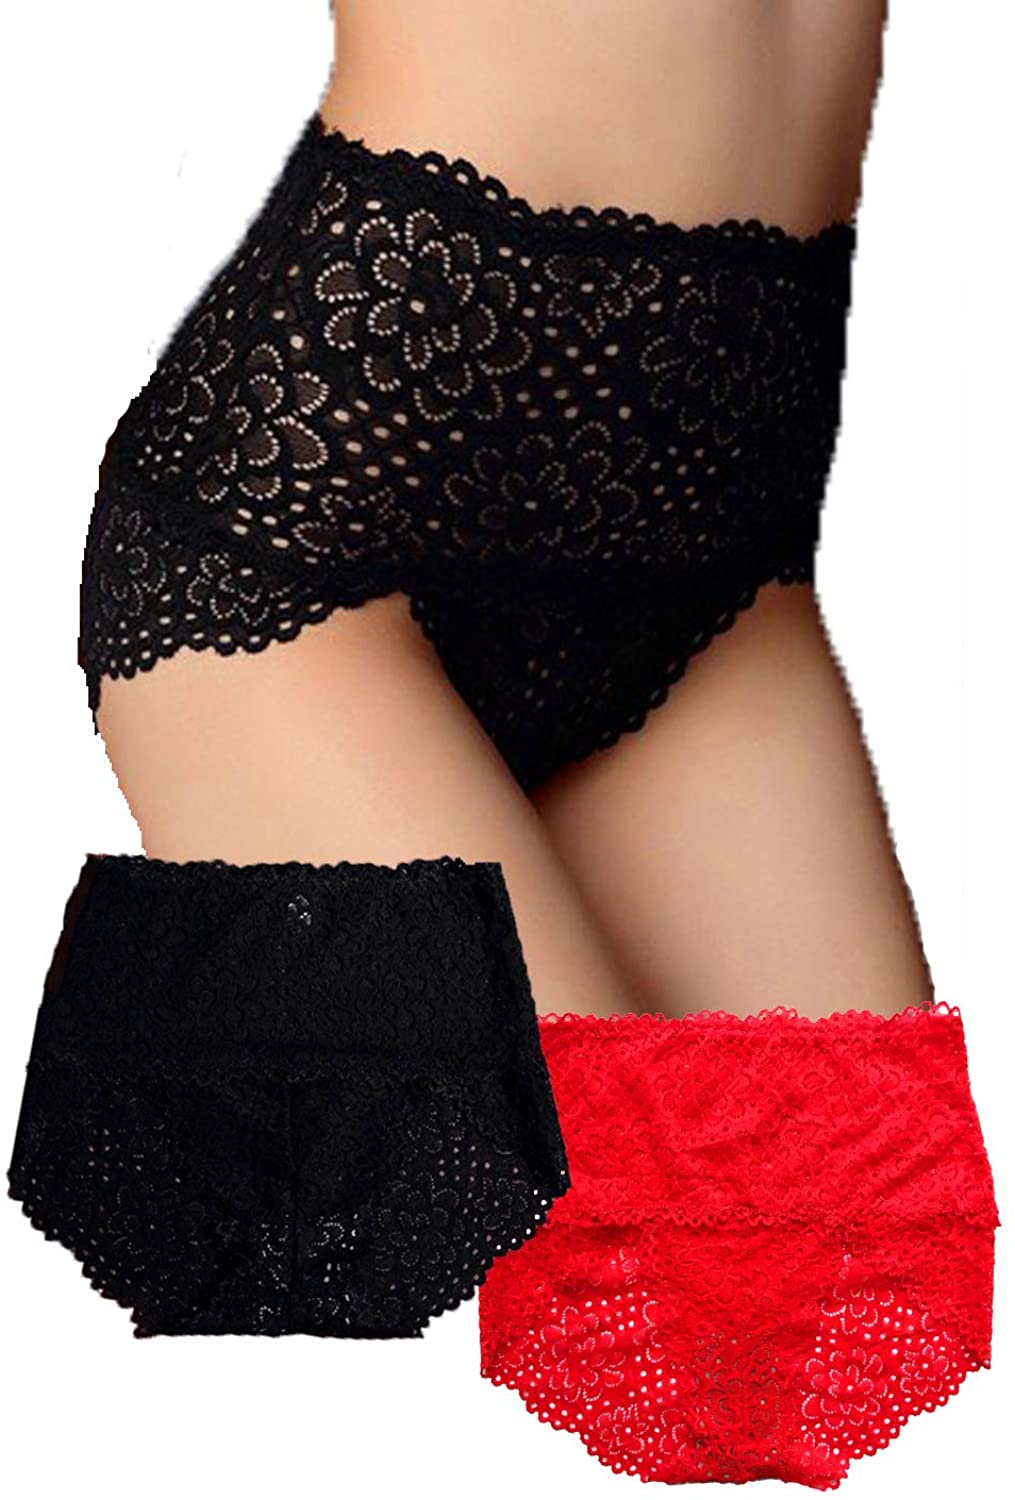 Price:$9.99 Smoonsear's Feel High Waisted Bikini Panties Cheeky Lace Underwear 2-Pack for Women US Size 5 6 7 Black Red at Amazon Women’s Clothing store